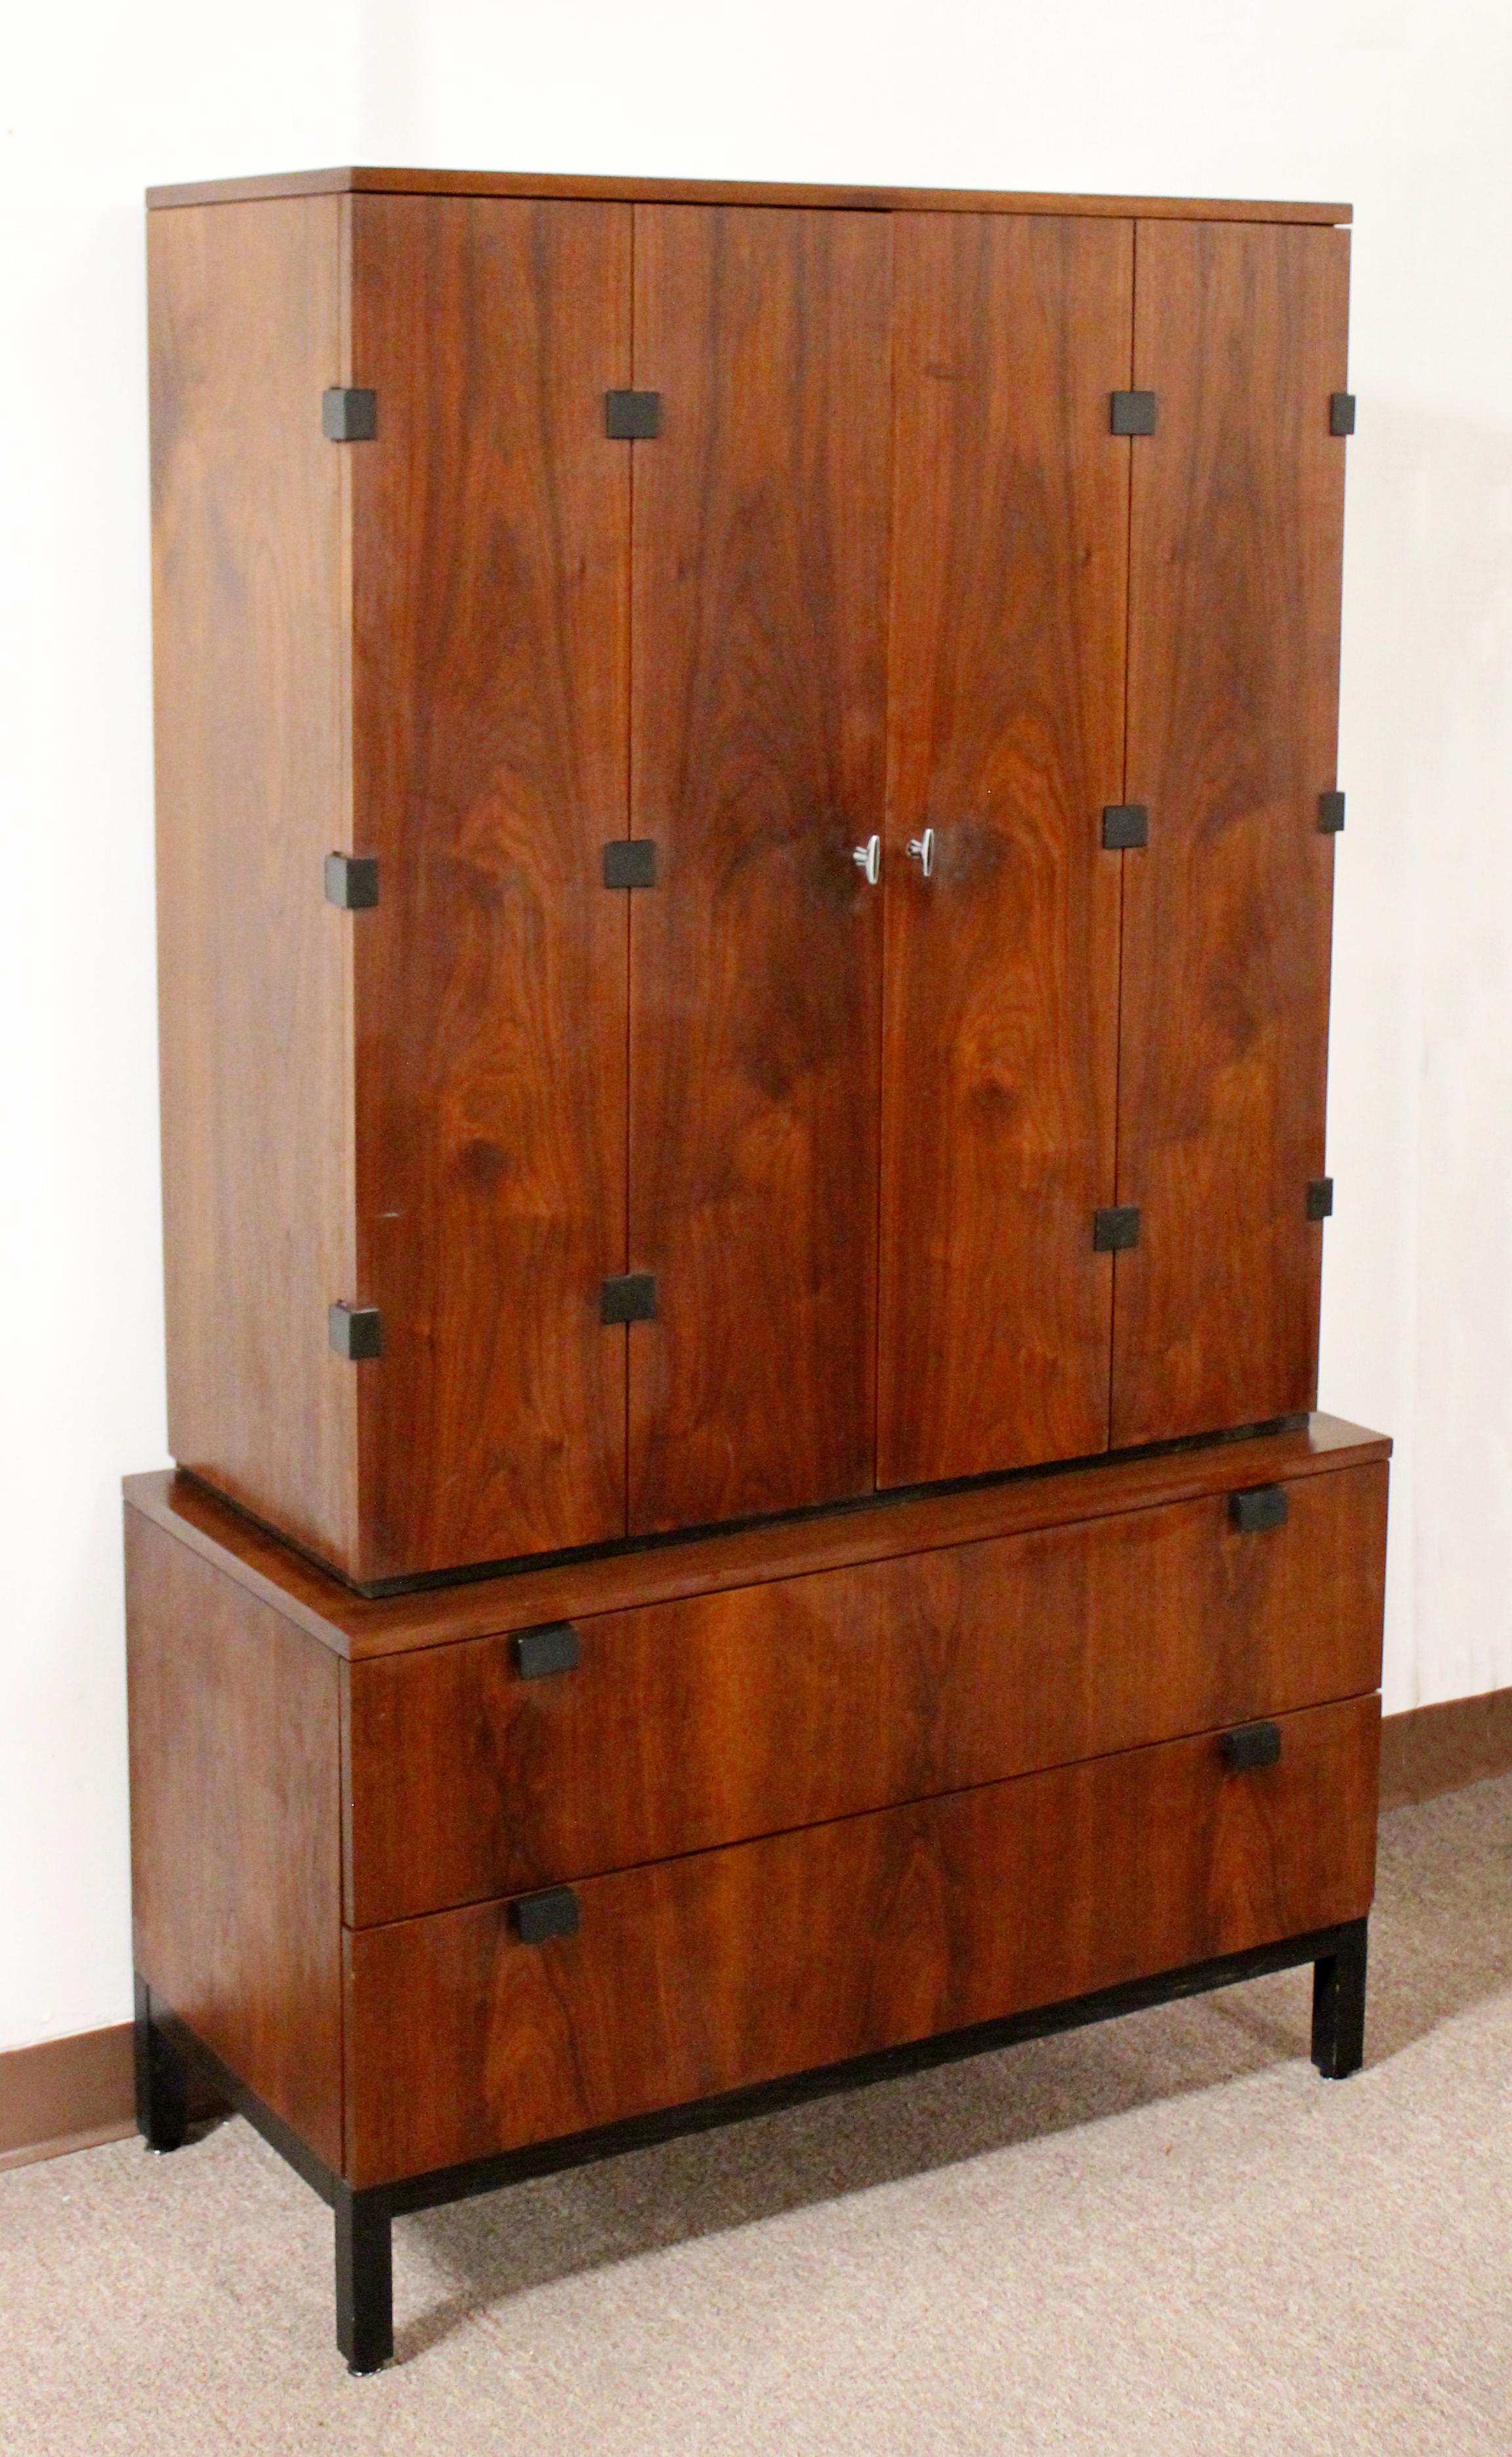 For your consideration is a fantastic walnut wood armoire wardrobe unit, by Milo Baughman for Directional, circa 1970s. In excellent vintage condition. The dimensions are 40